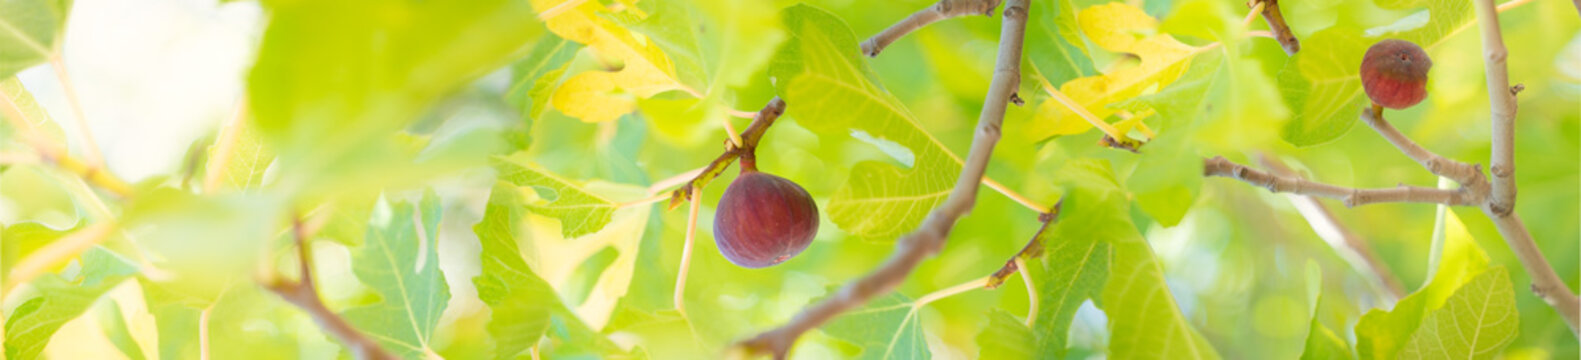 Leaves and figs